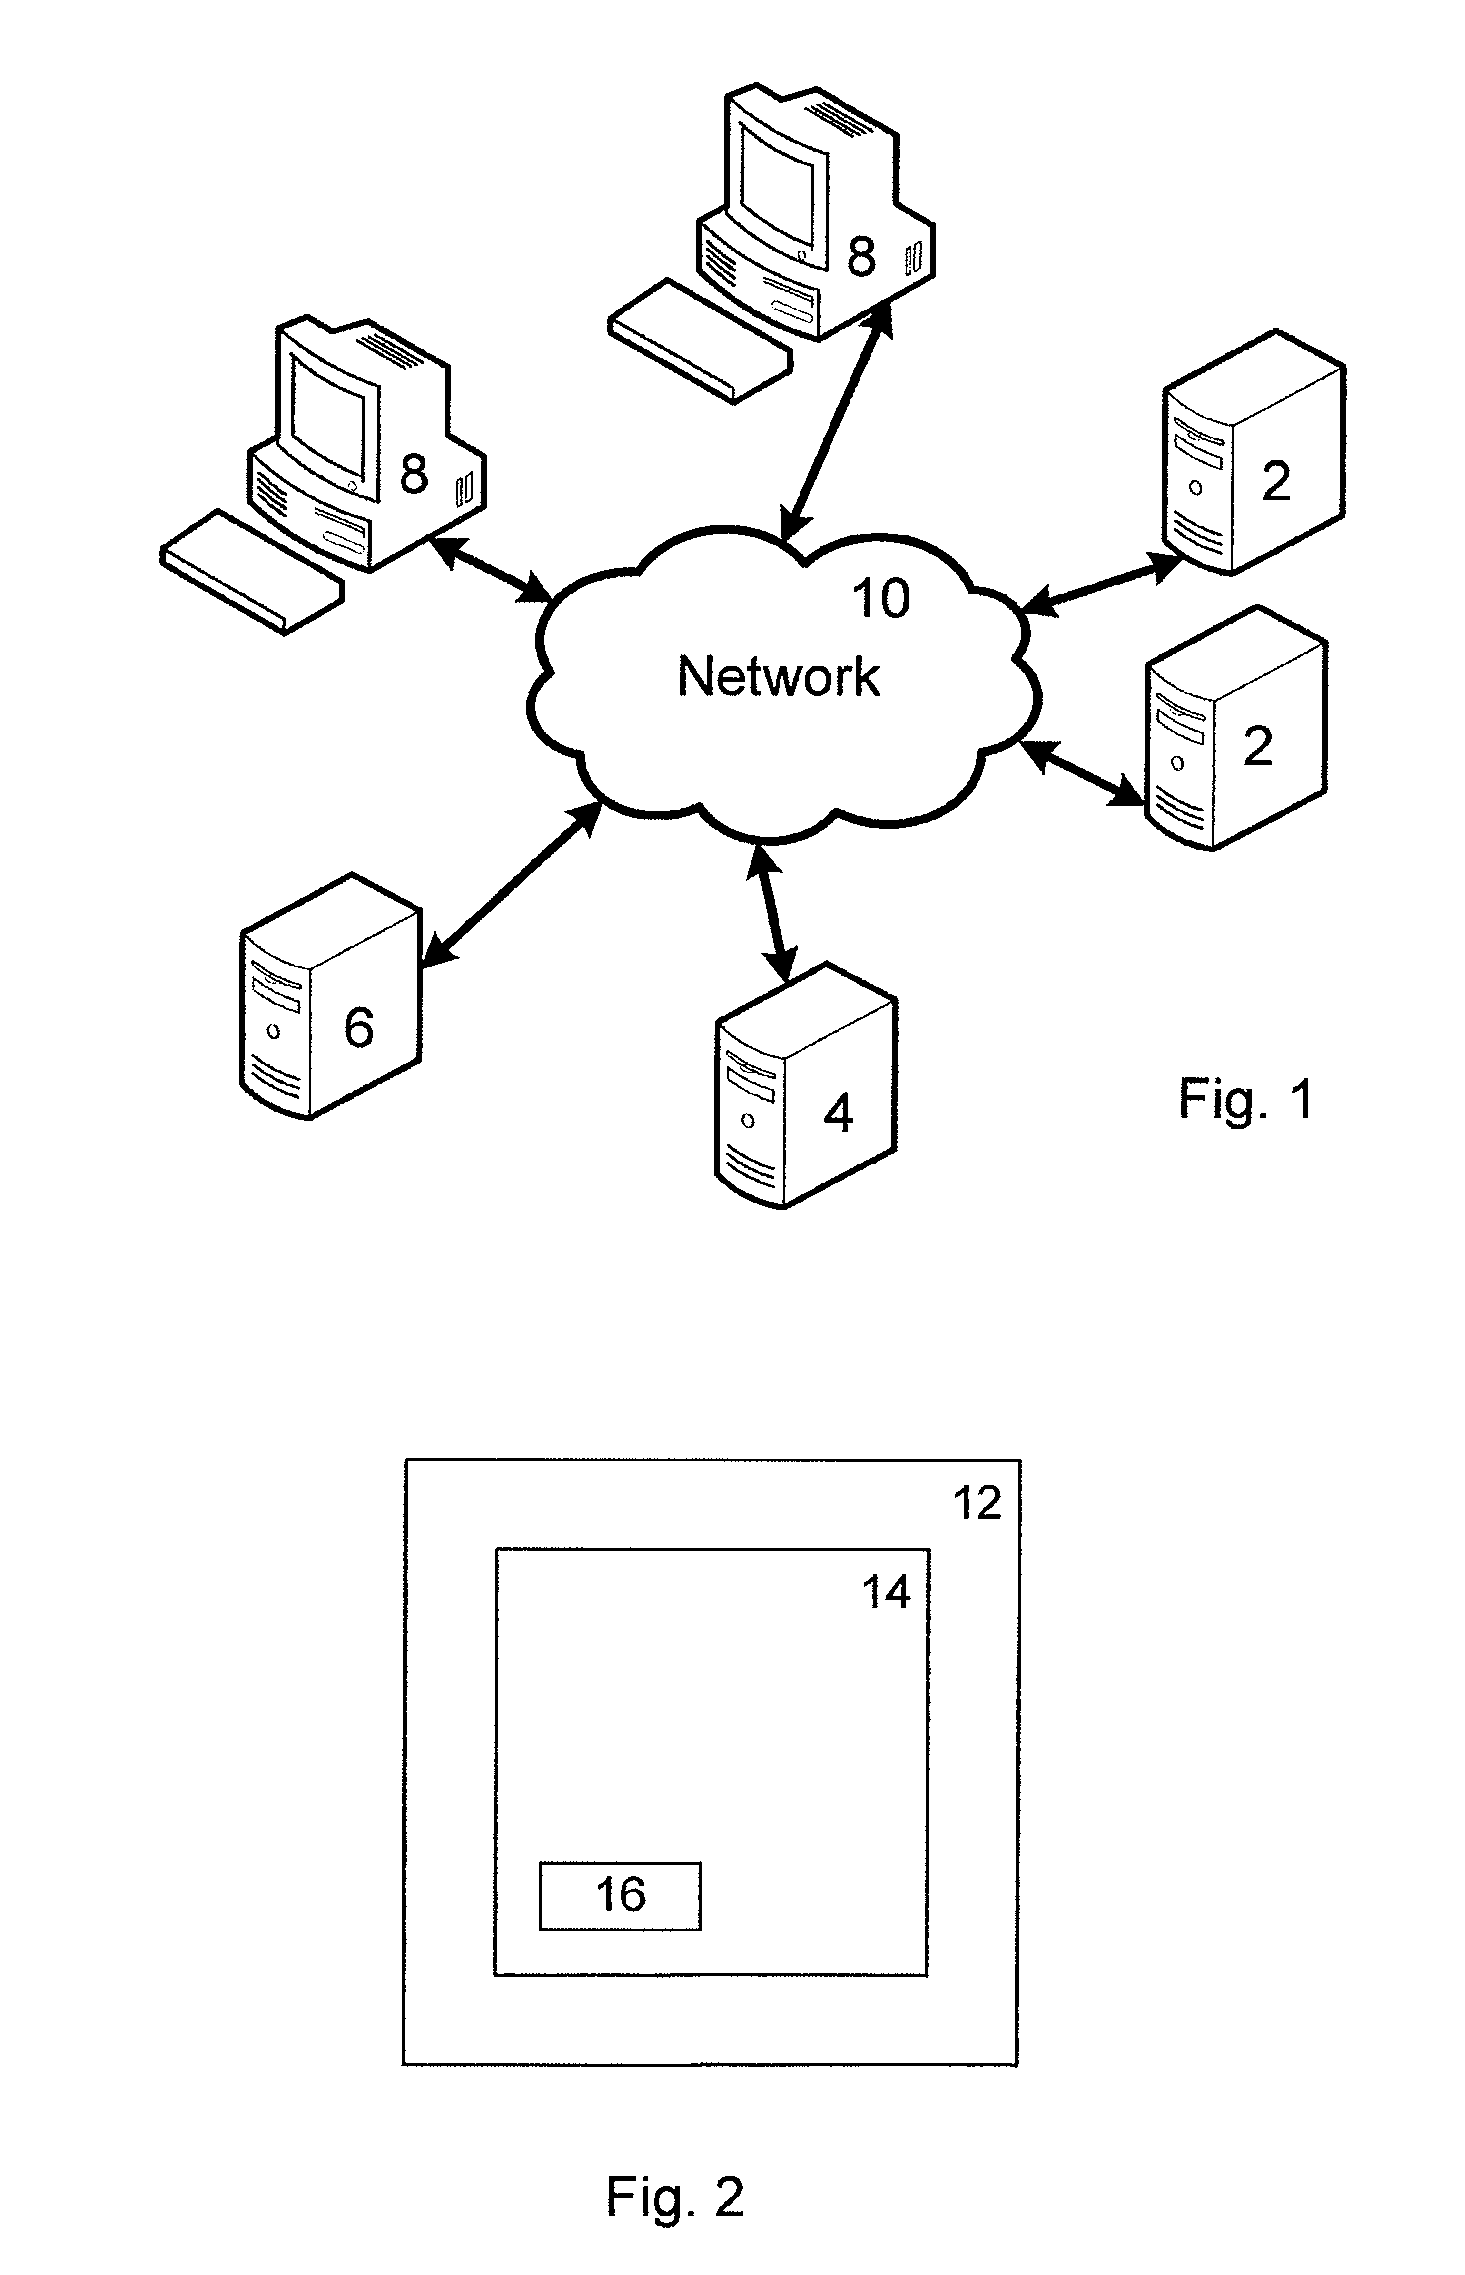 Method for tracking user interaction with a web page